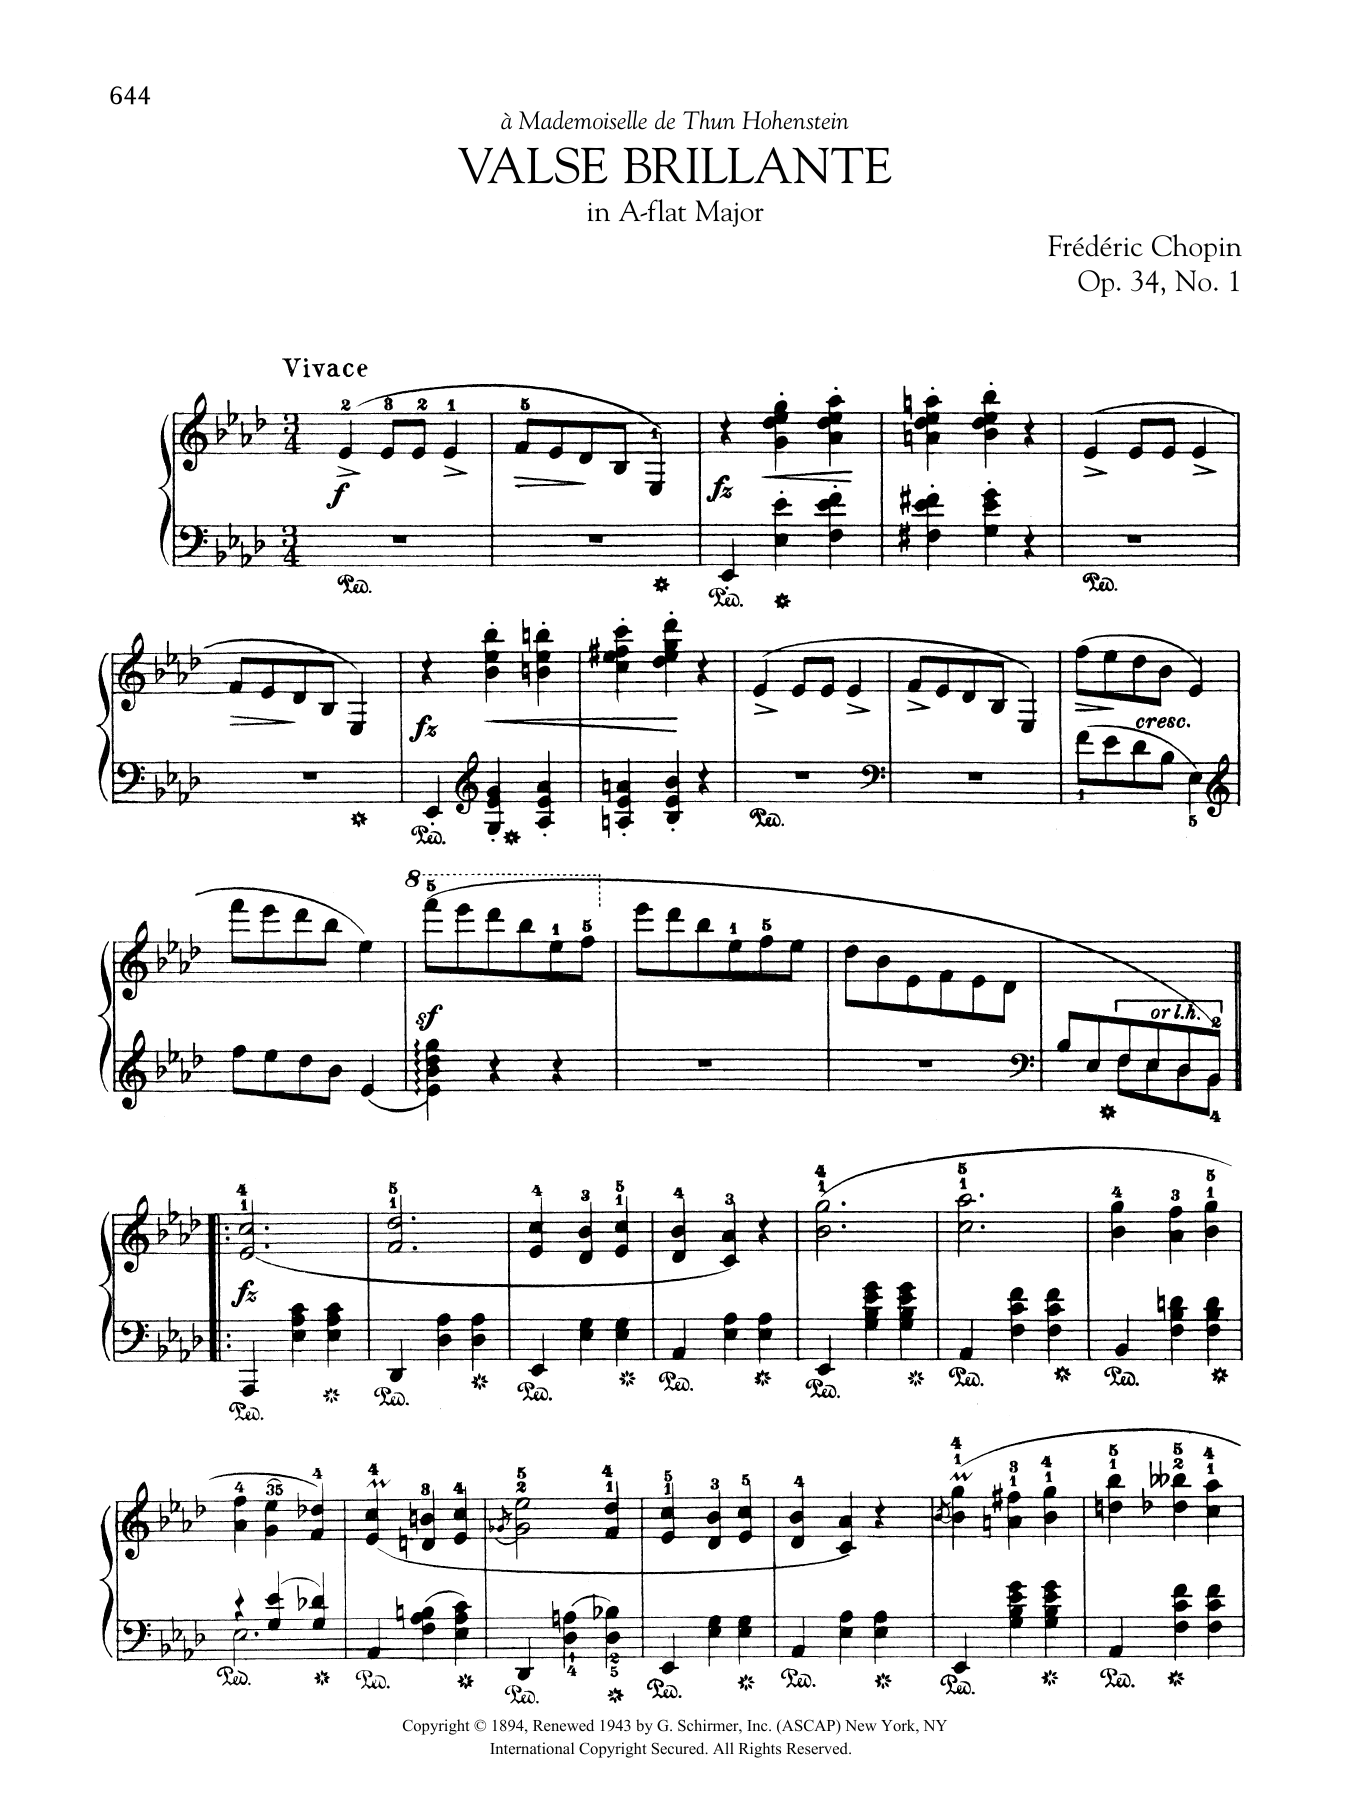 Frédéric Chopin Valse brillante in A-flat Major, Op. 34, No. 1 sheet music notes and chords. Download Printable PDF.